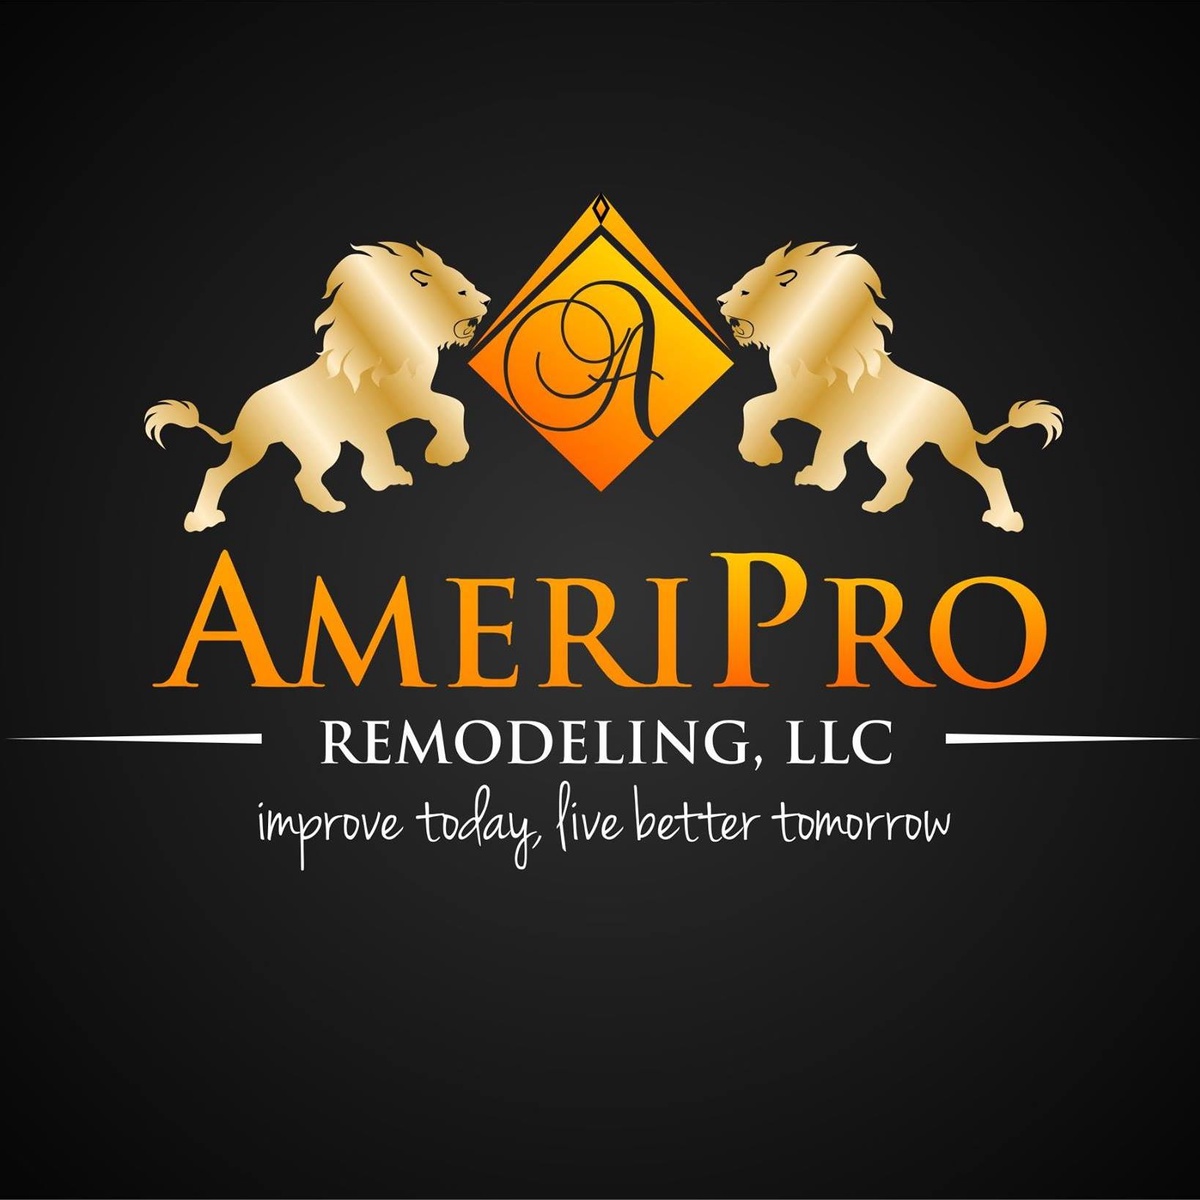 Ameripro Remodeling: Transforming Maryland Homes With Expert Renovation Services